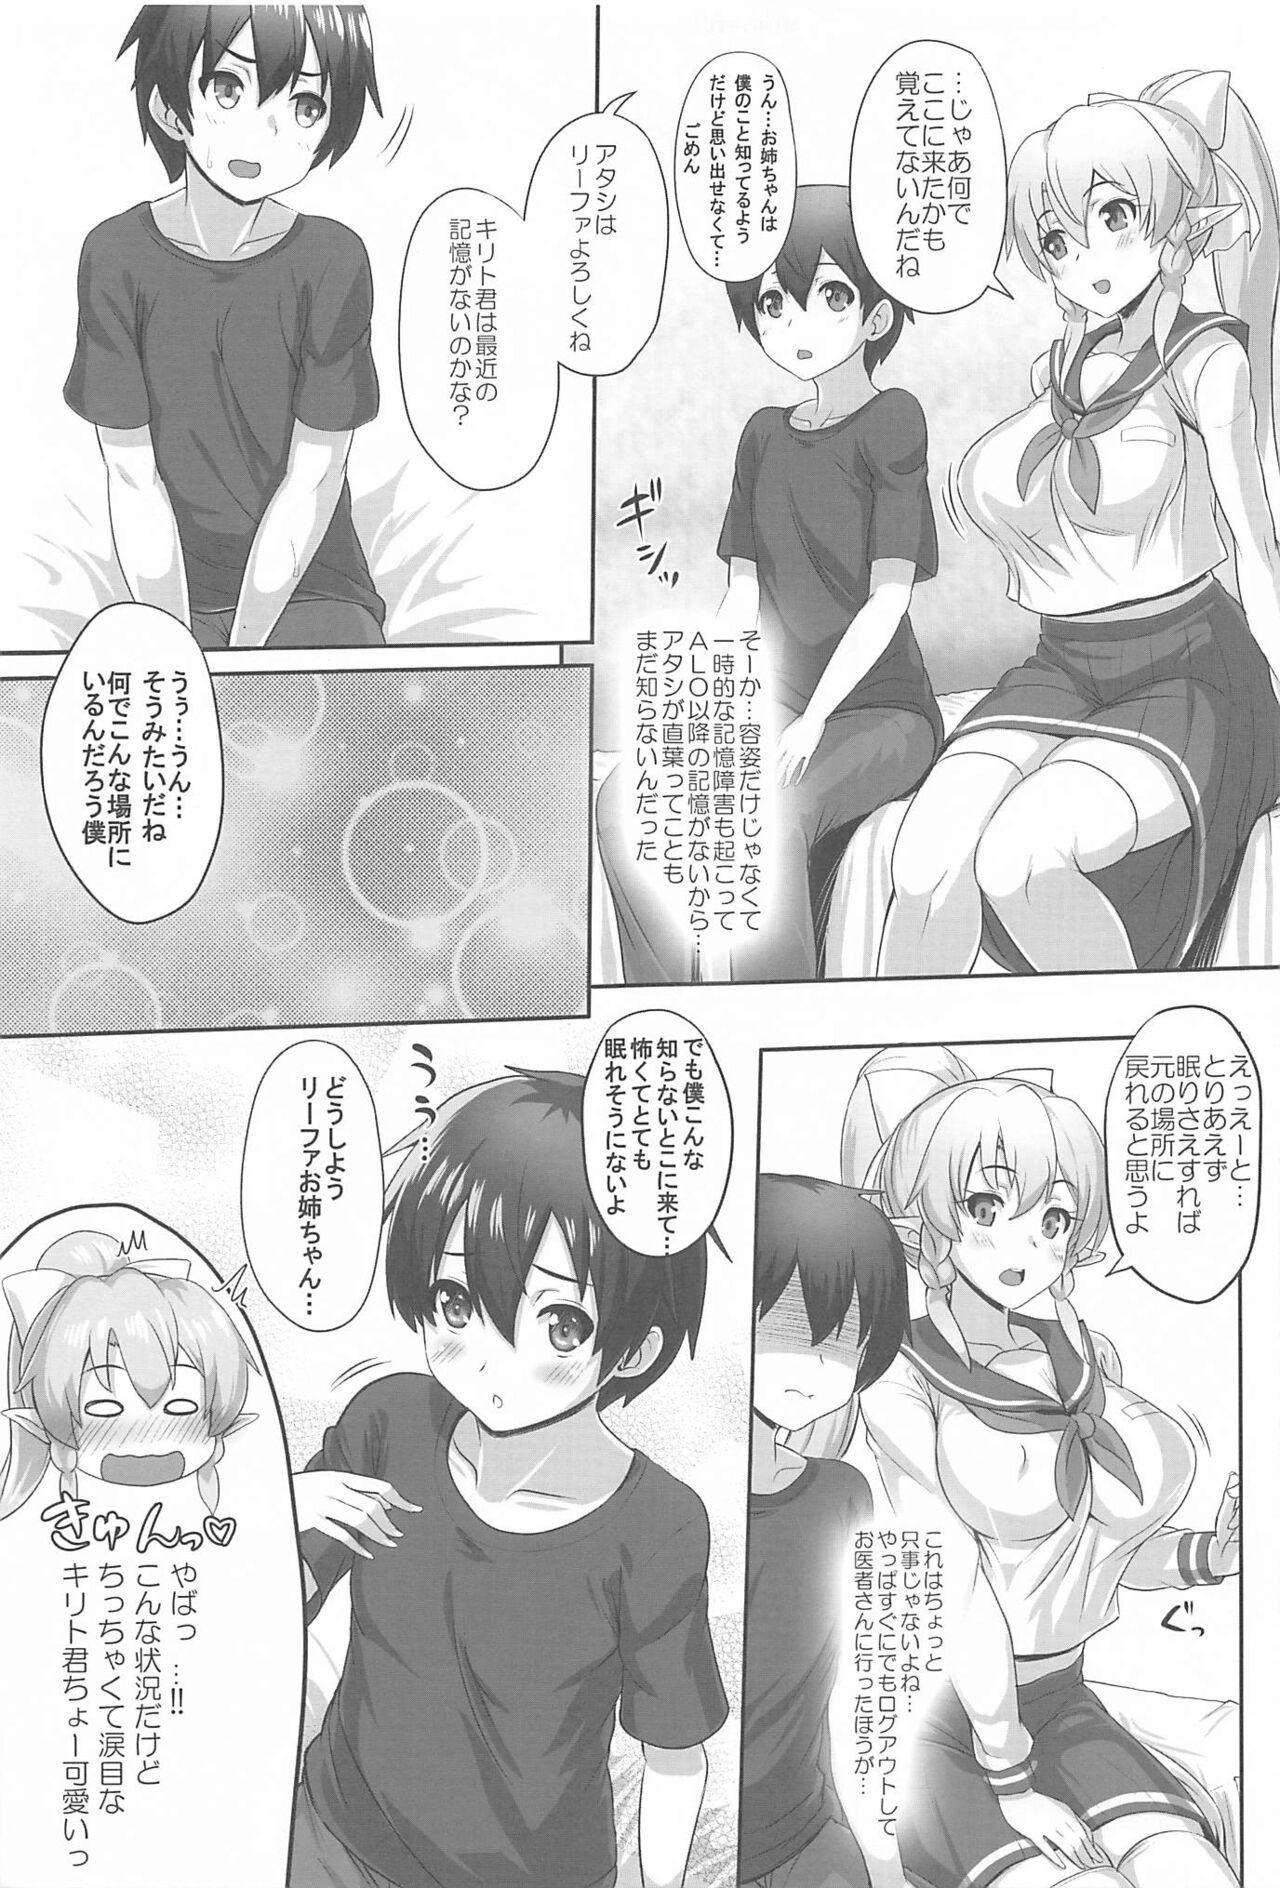 Classy Sister Affection On&Off 3 SAO Soushuuhen - Sword art online Panty - Page 6